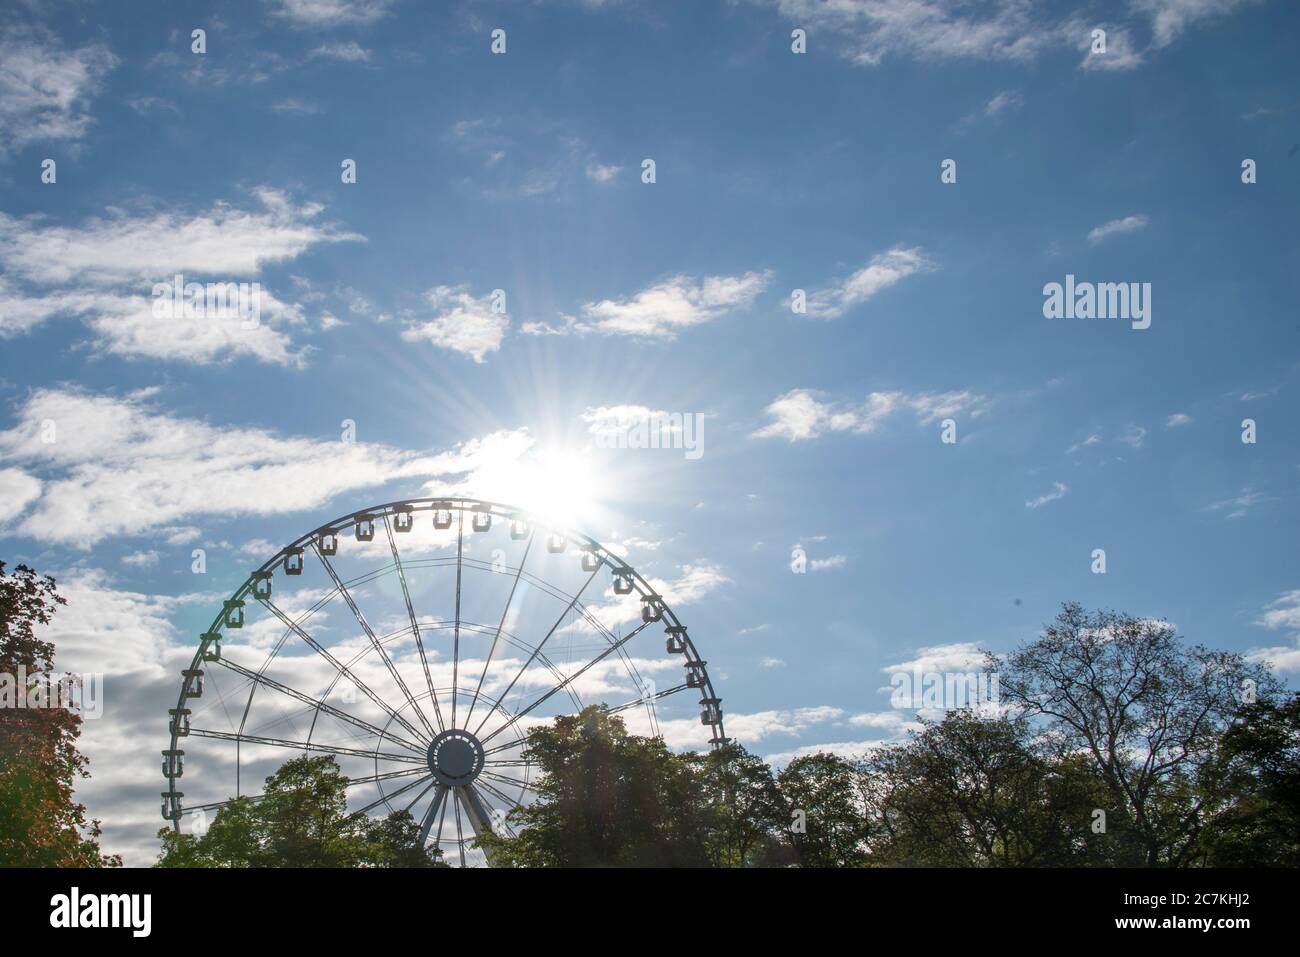 Germany, Saxony-Anhalt, Magdeburg: In the middle of the Corona crisis, a 55-meter-high ferris wheel was built in the Magdeburg city park. Stock Photo